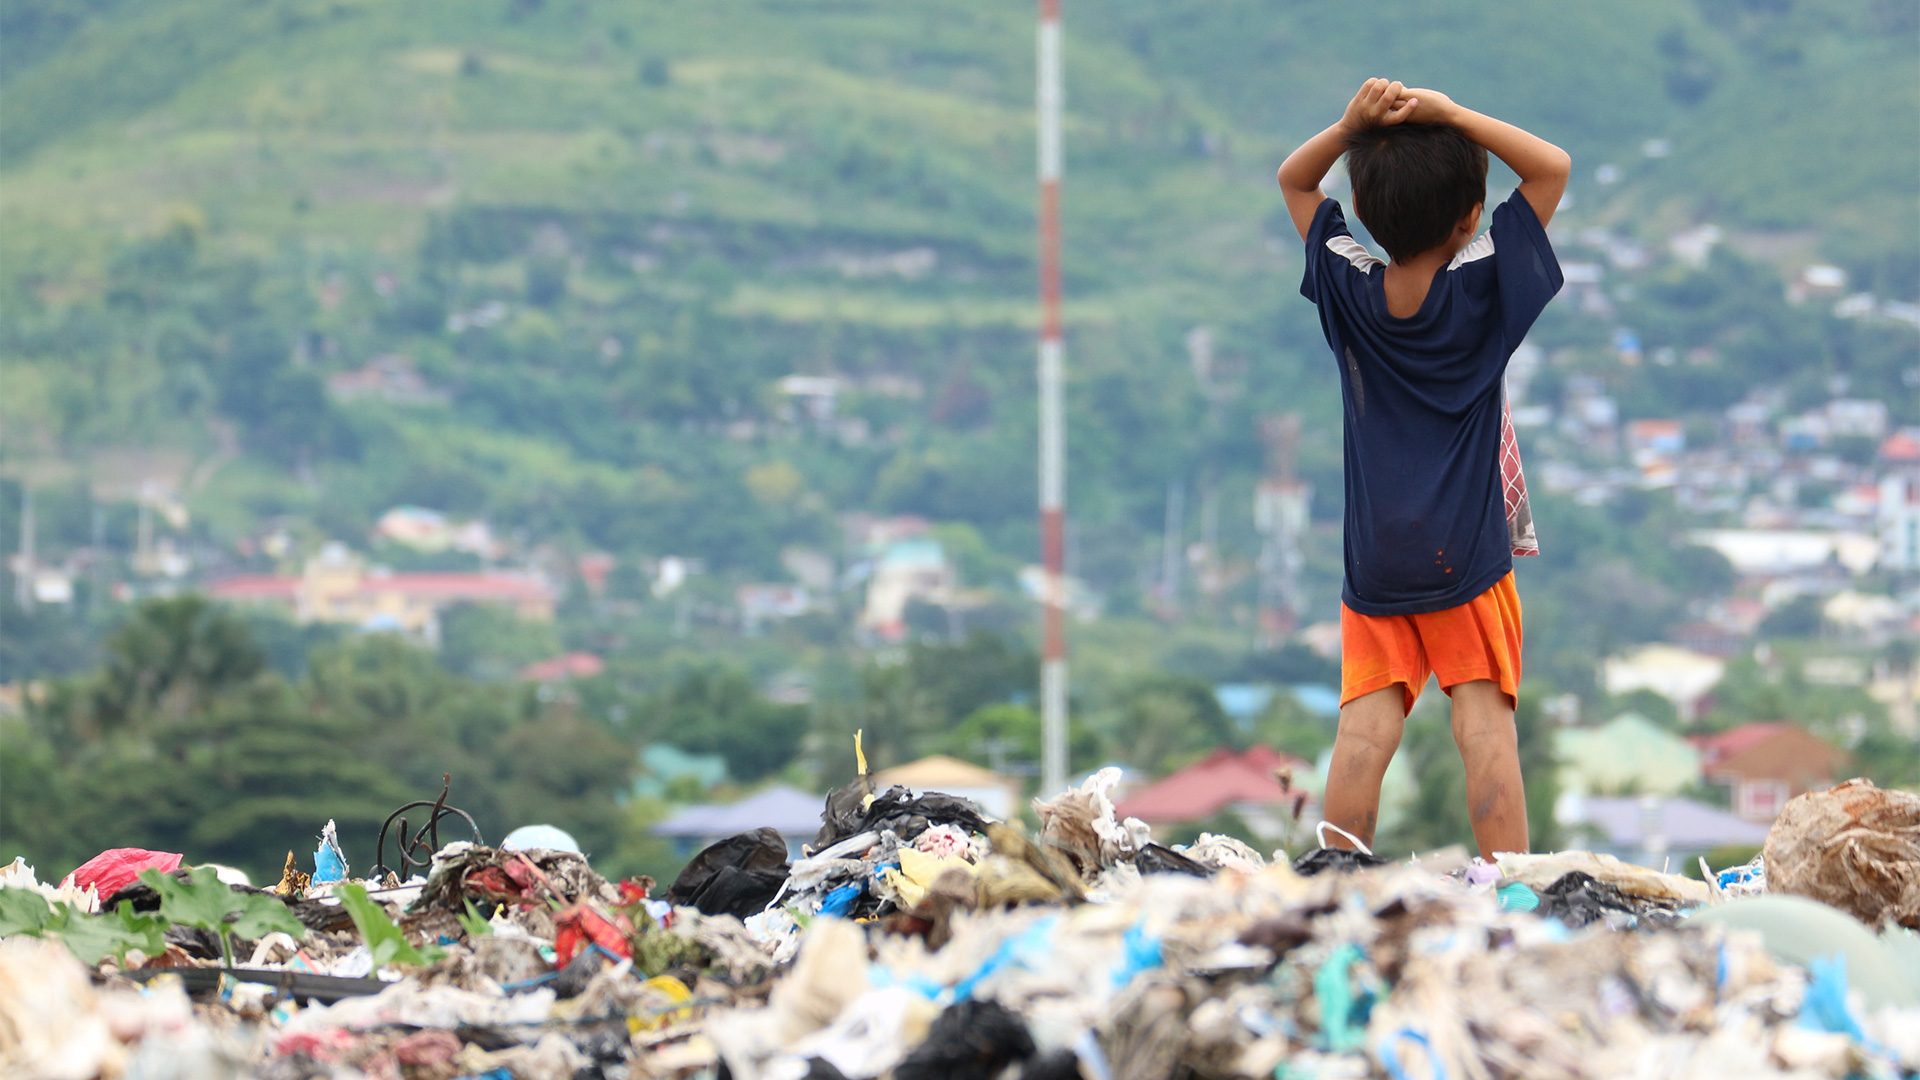 MMDA garbage collection expenses now over P3 billion amid growing waste